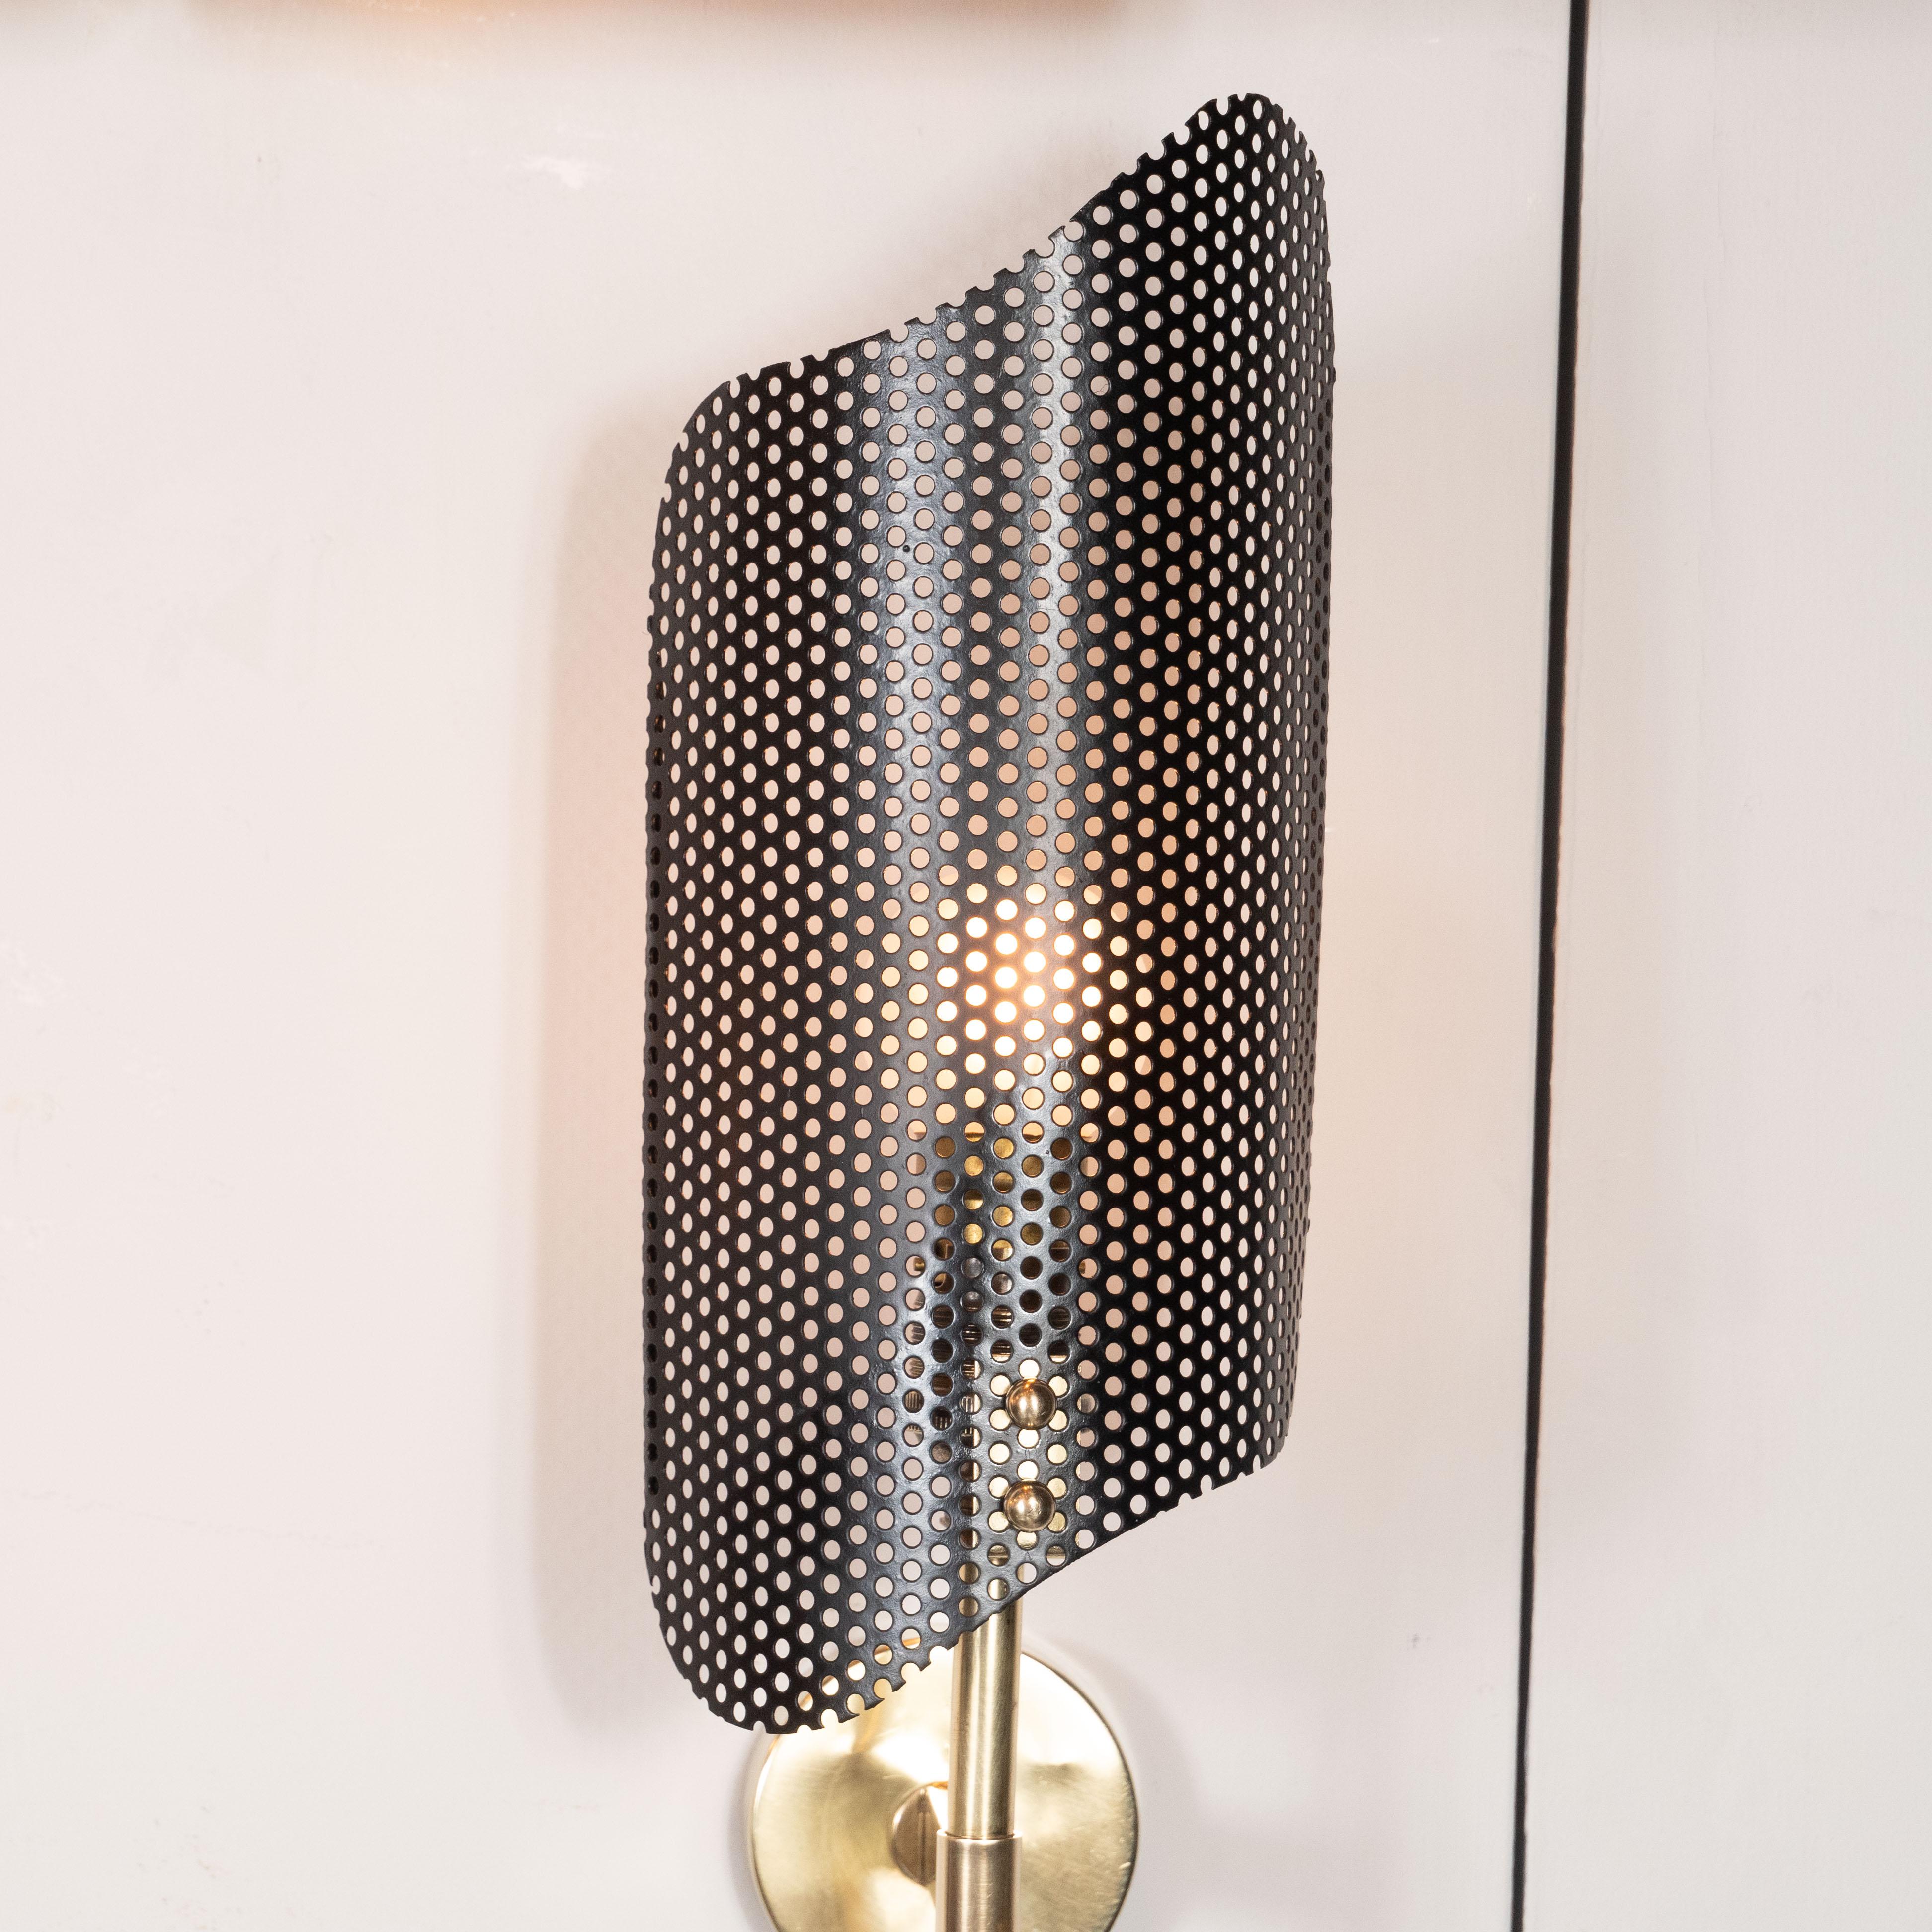 This refined sconce was realized in France, circa 1950 by the celebrated designer Mathieu Matégot.  It feature slender brass body that culminate in a pointed conical finial; rhomboid shades in perforated black metal; and a circular backplate also in